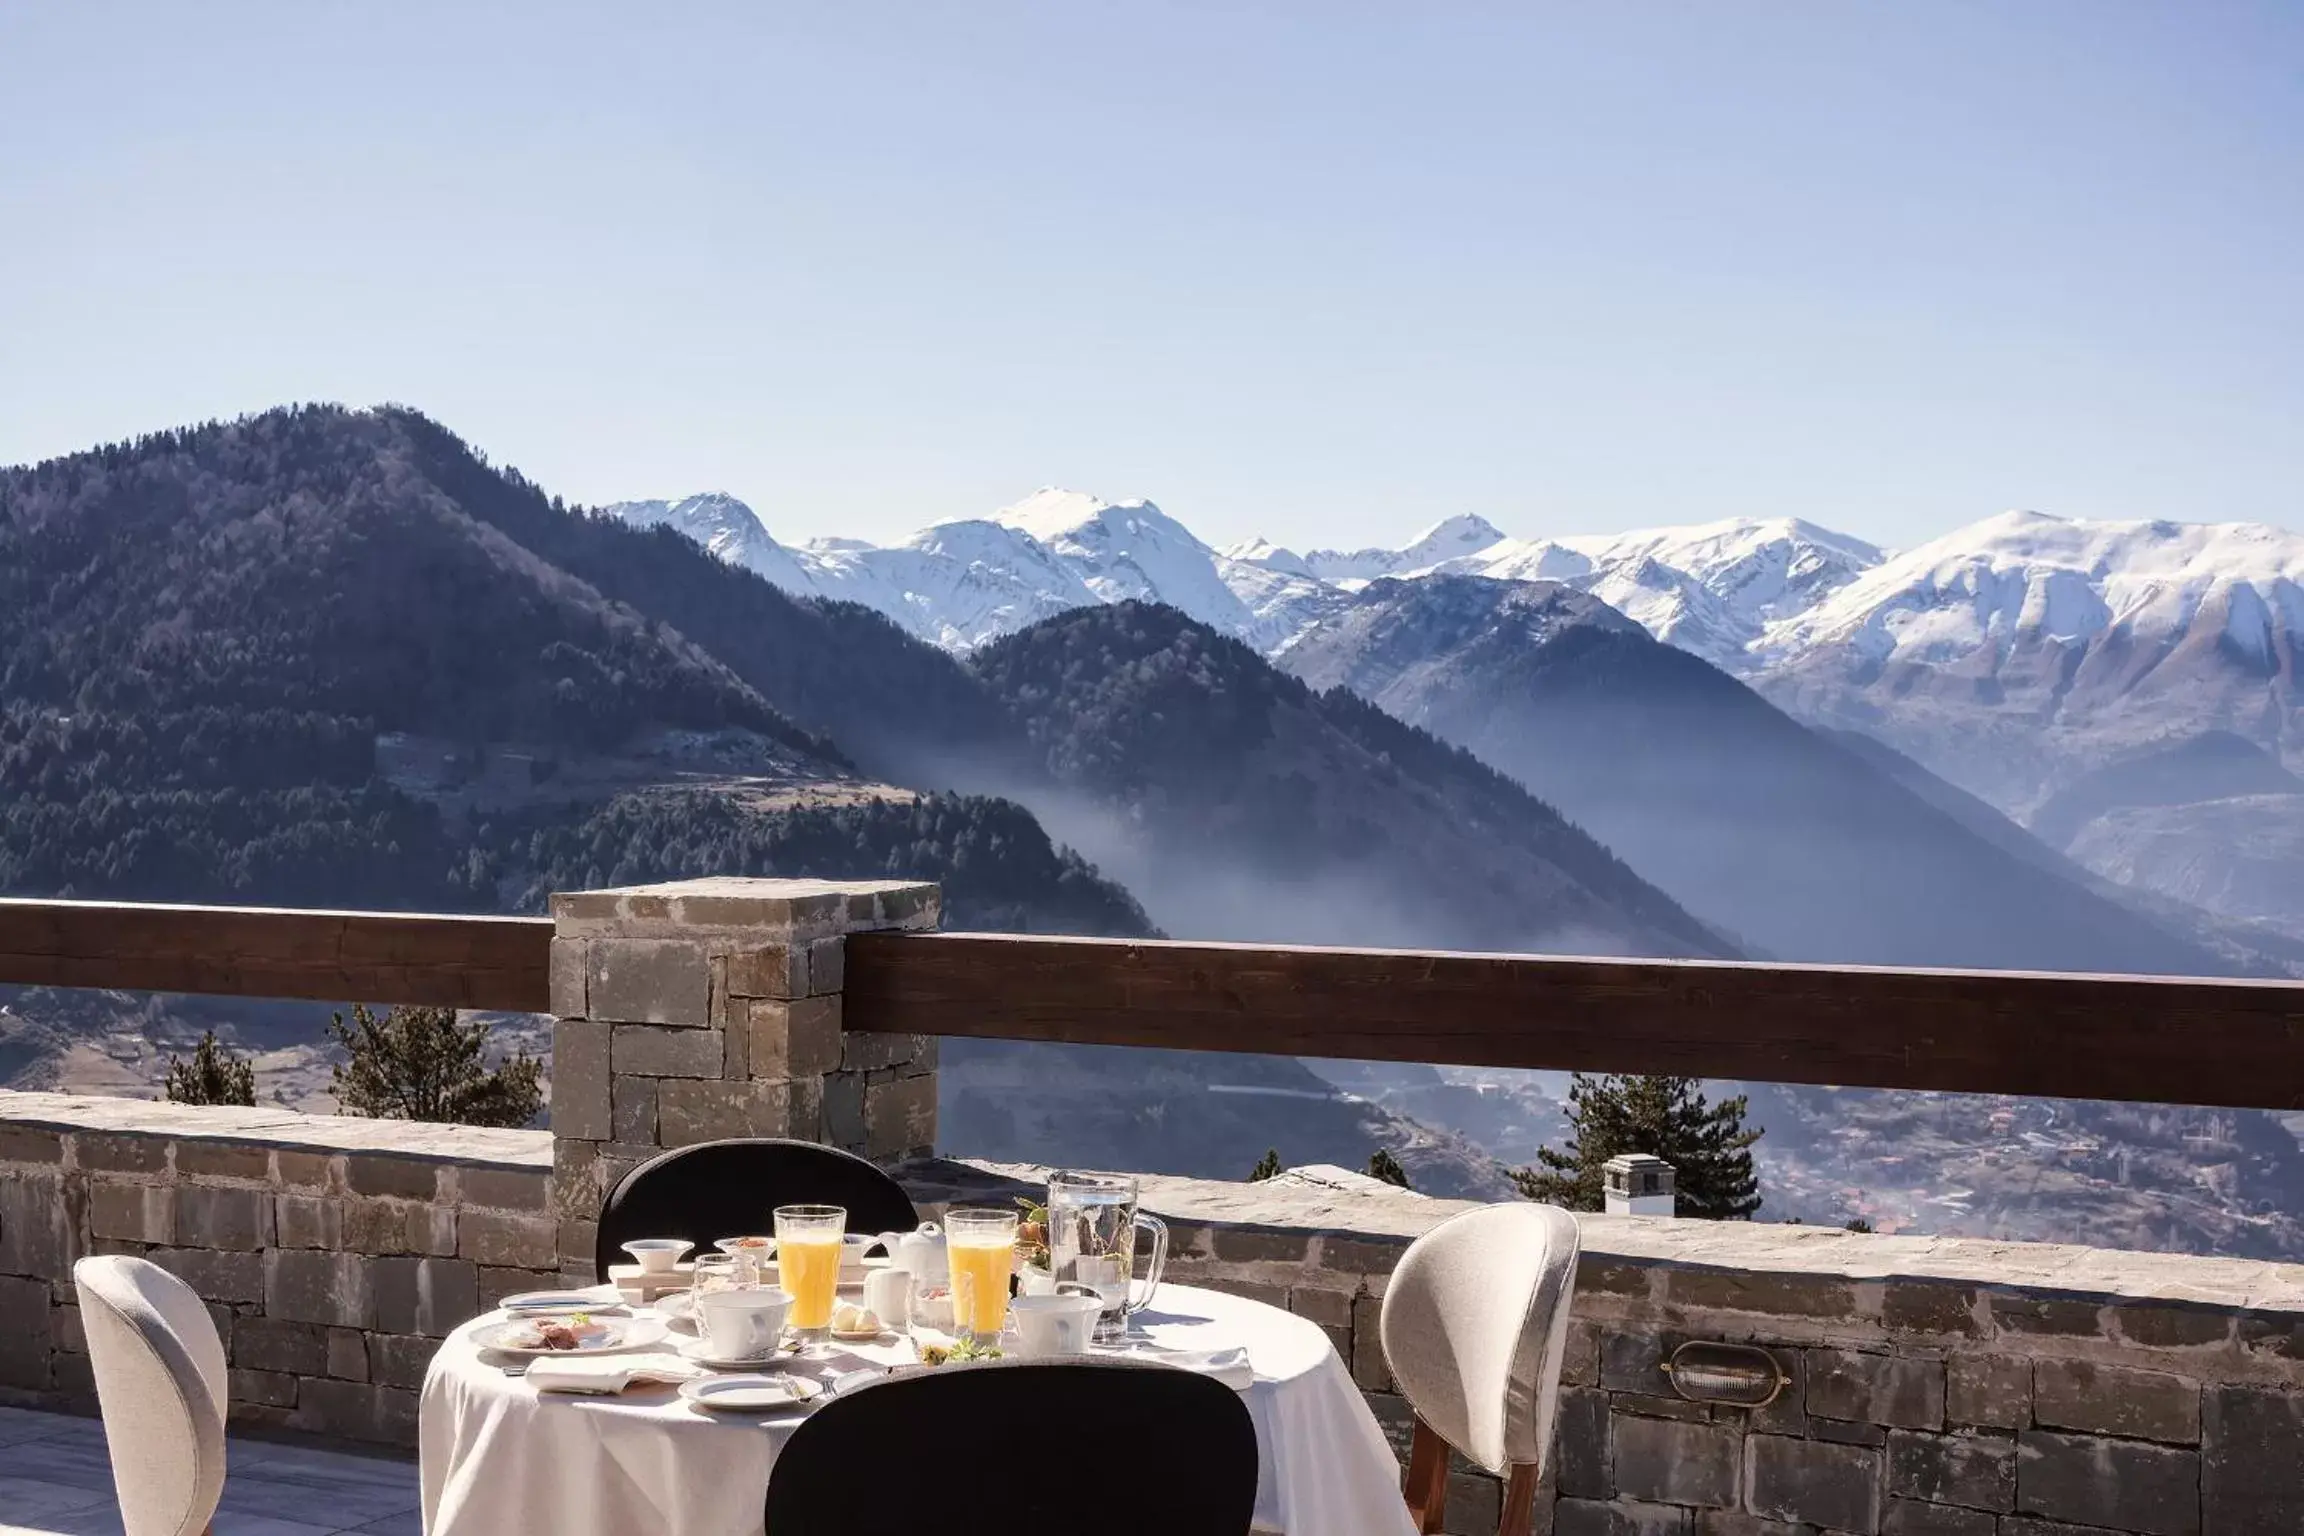 Balcony/Terrace, Mountain View in Grand Forest Metsovo - Small Luxury Hotels of the World